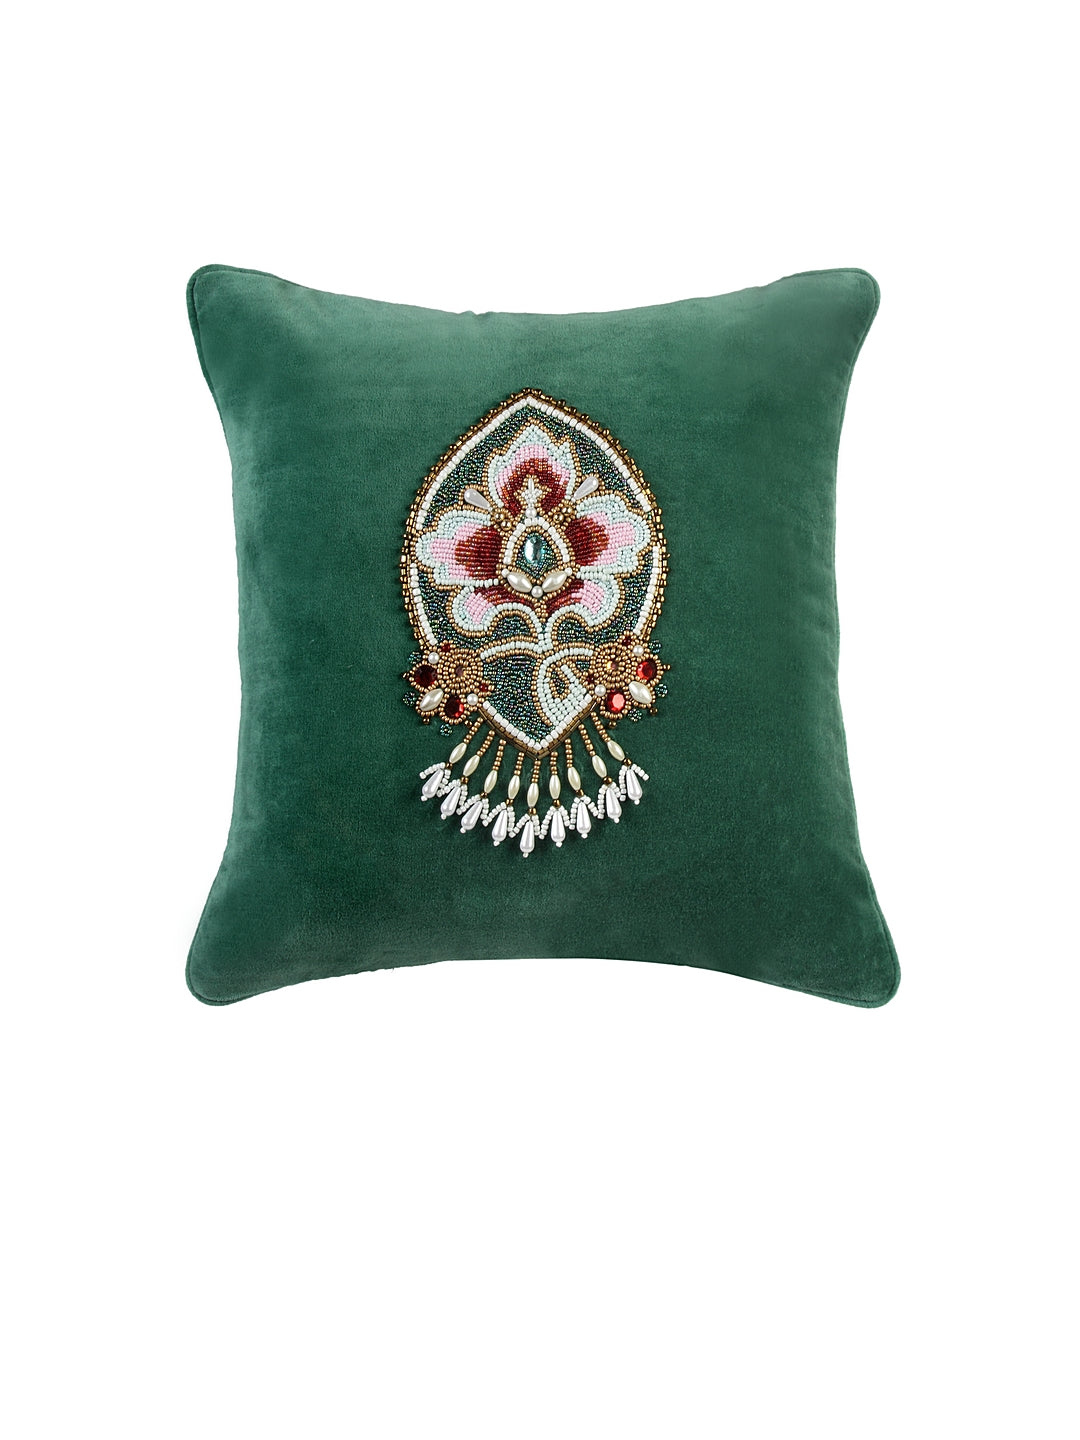 Blanc9 Chandelier Embroidered Cushion Cover